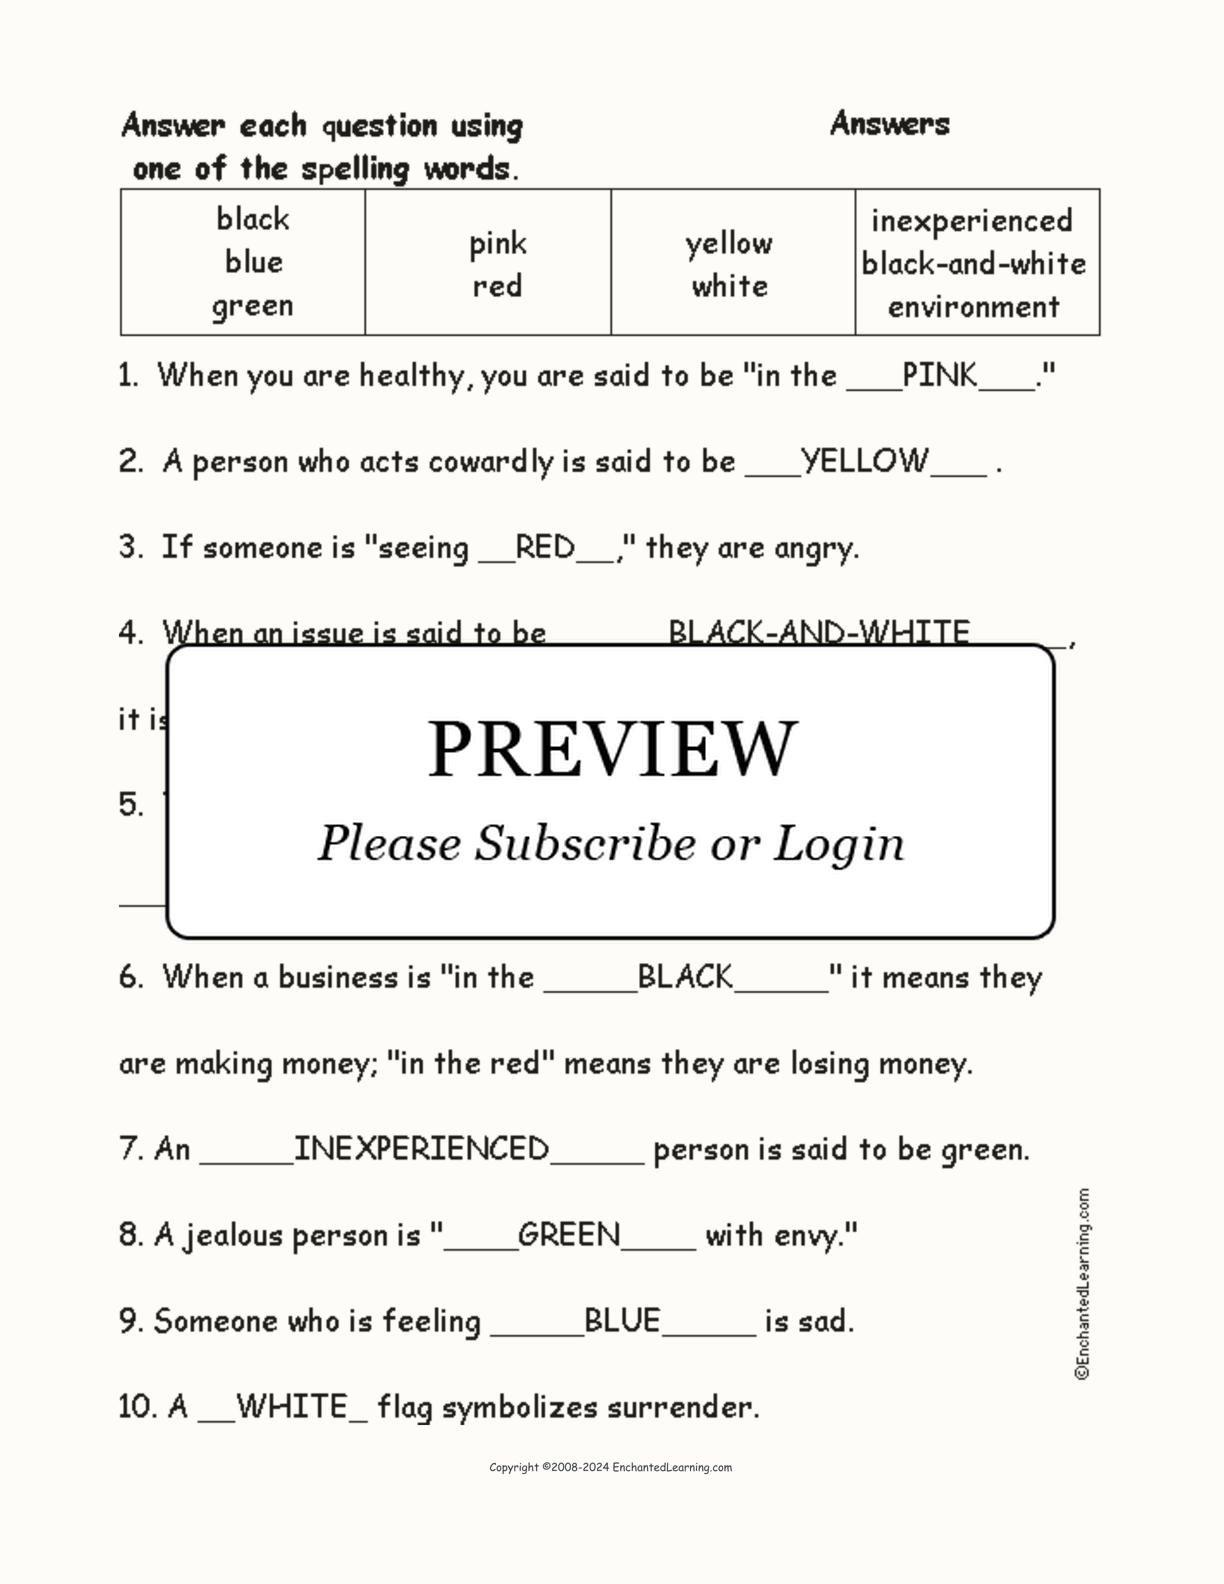 Color Metaphors and Imagery: Spelling Word Questions interactive worksheet page 2